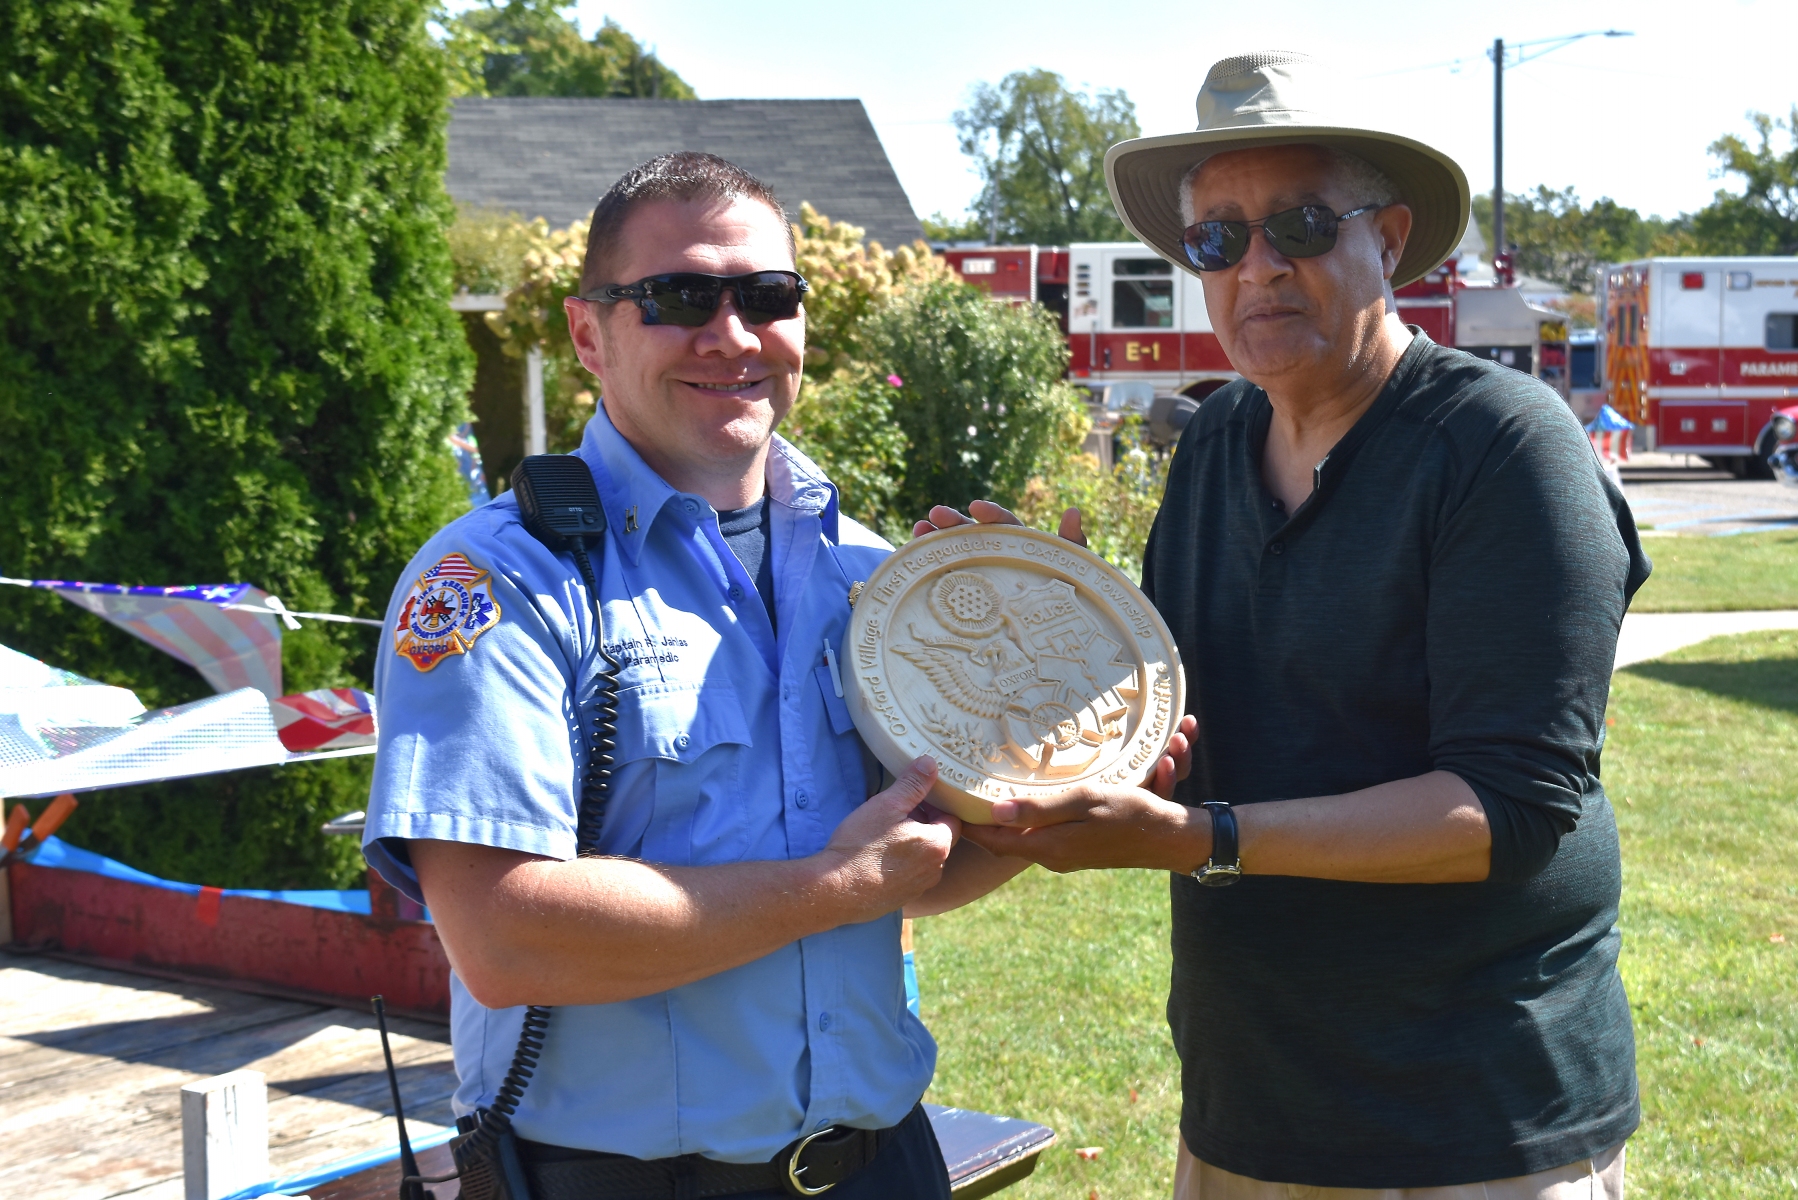 On-behalf-of-Oxford-Fire-Department-Cpt.-Ron-Jahlas-accepts-an-engraved-plaque-from-Oxford-UMC-pastor-Julius-E.-Del-Pino.-Photo-by-J.-Hanlon.